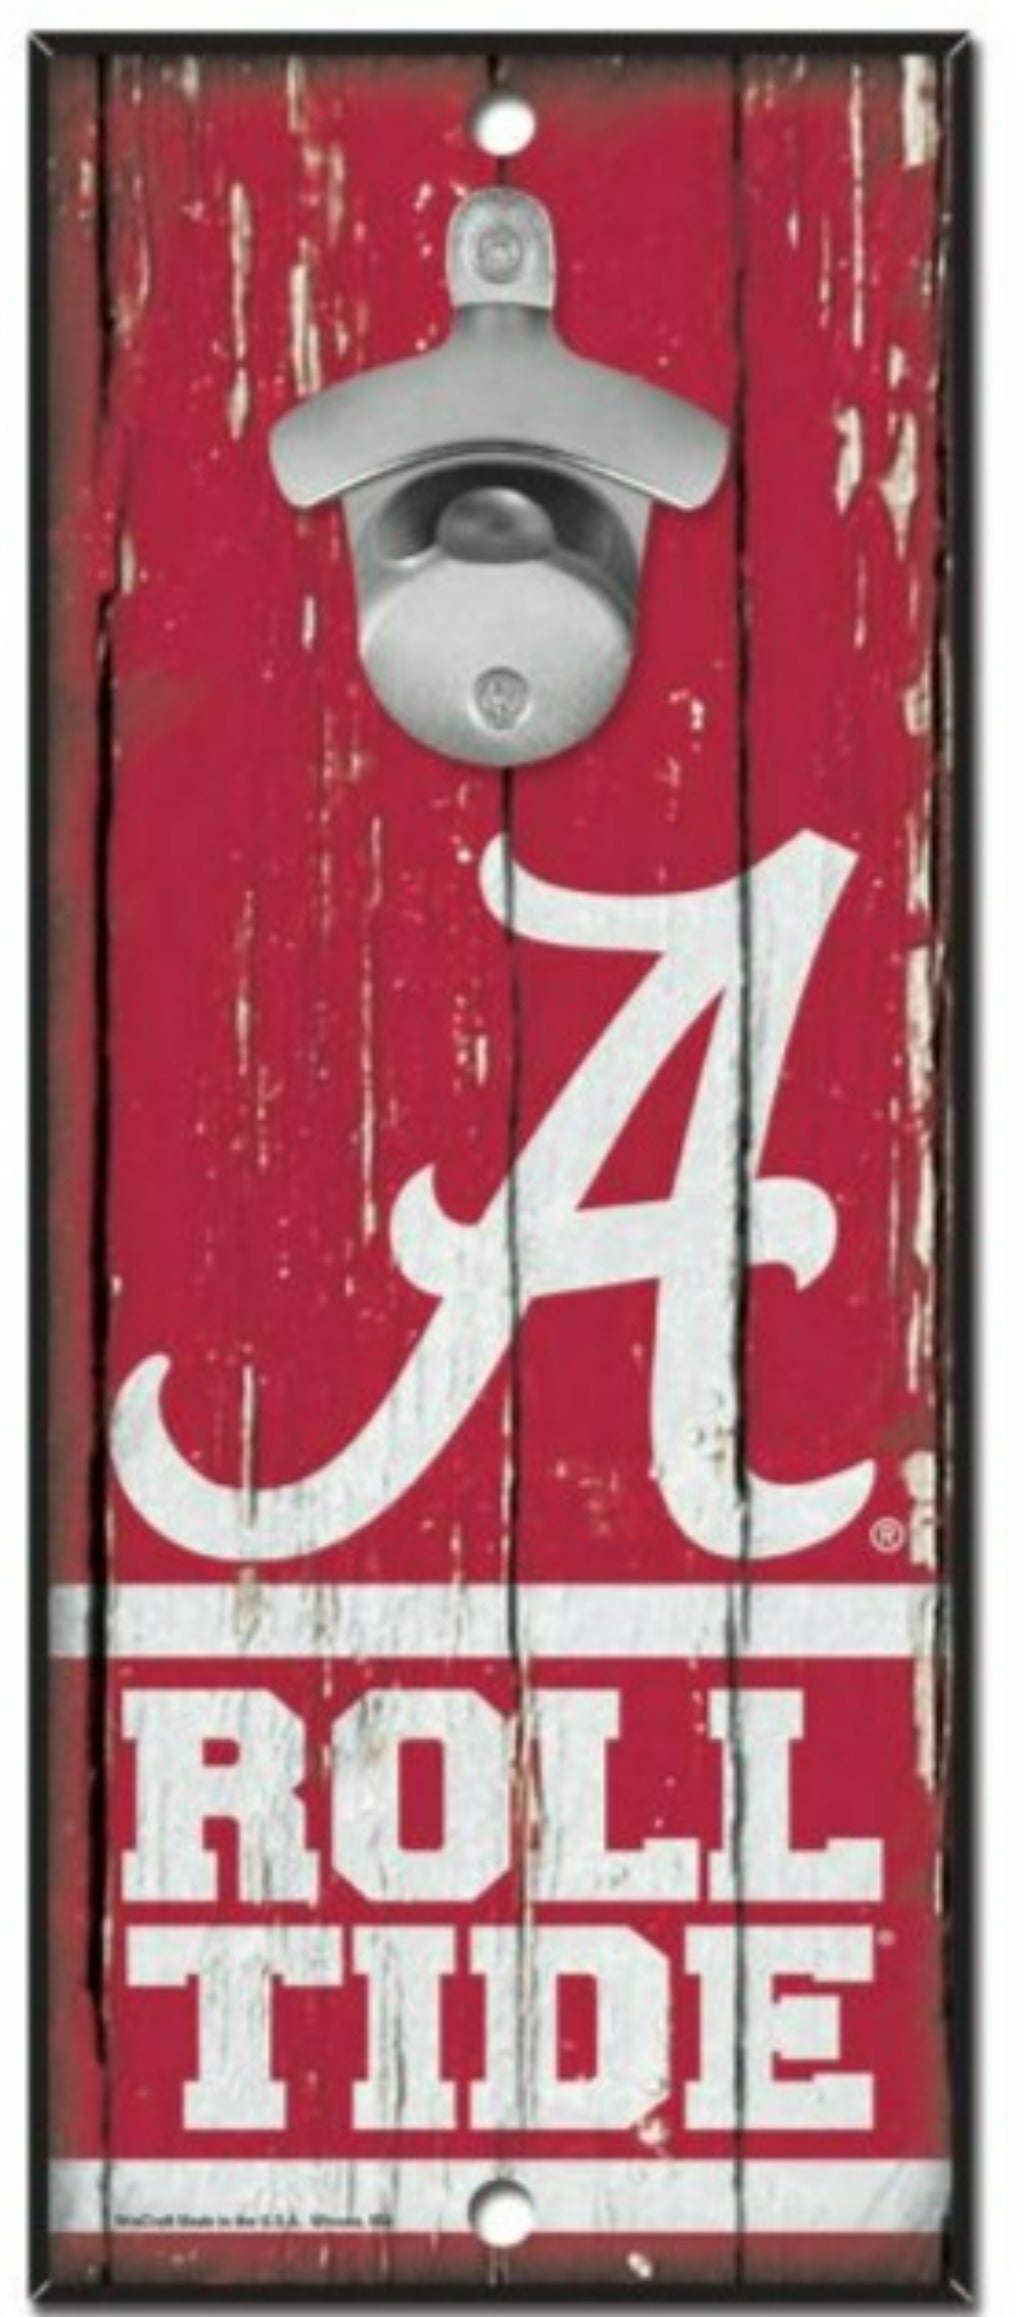 Alabama Crimson Tide NCAA Bottle Opener Wood Sign - 5" x 11" of team pride! Durable hardboard with graphics and a metal opener. Made in the USA by Wincraft.